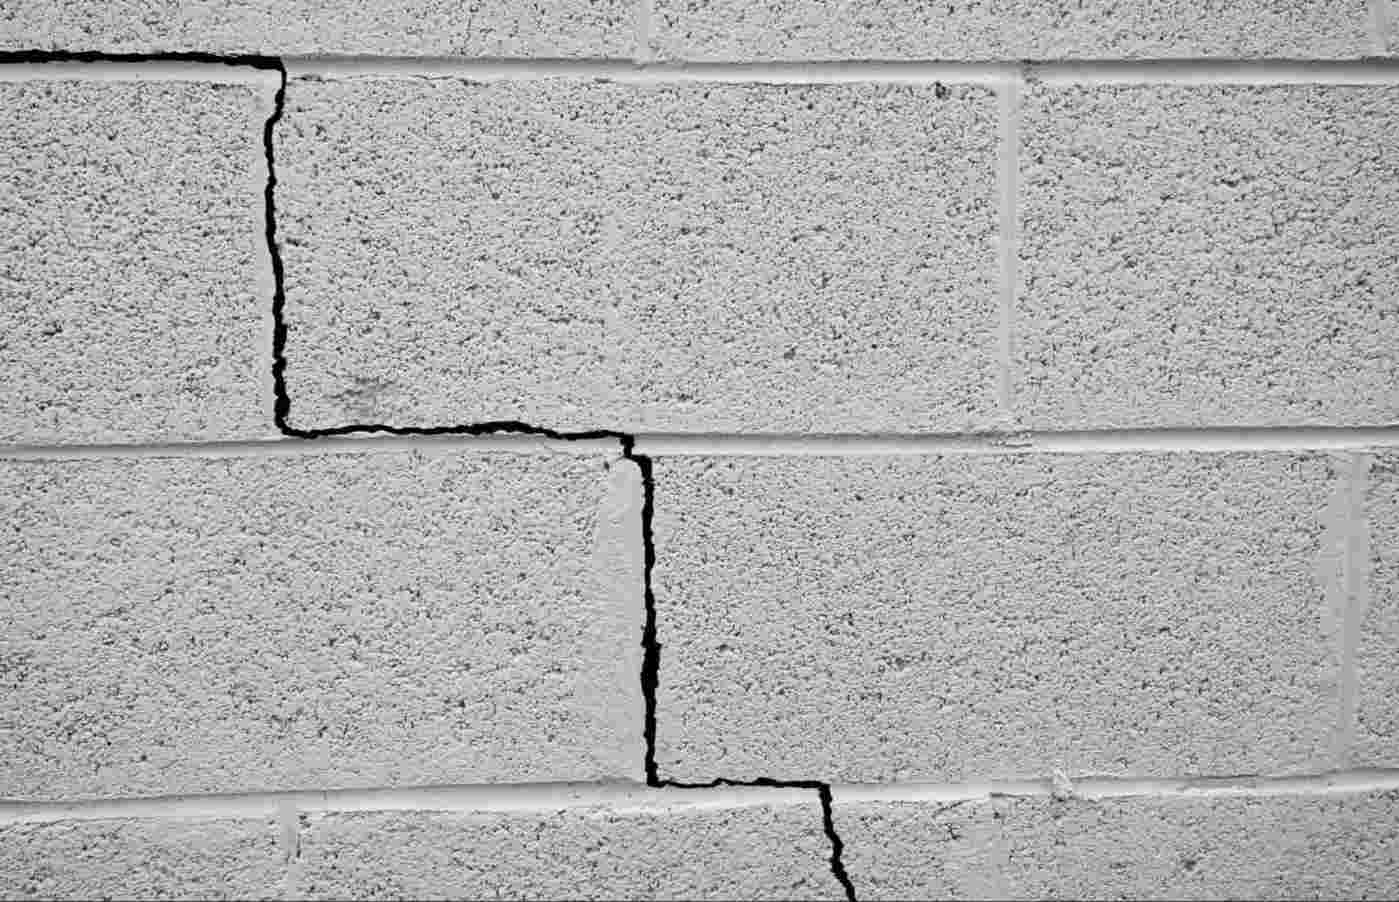 Stair-step cracks, one of the most serious types of foundation cracks in masonry block walls